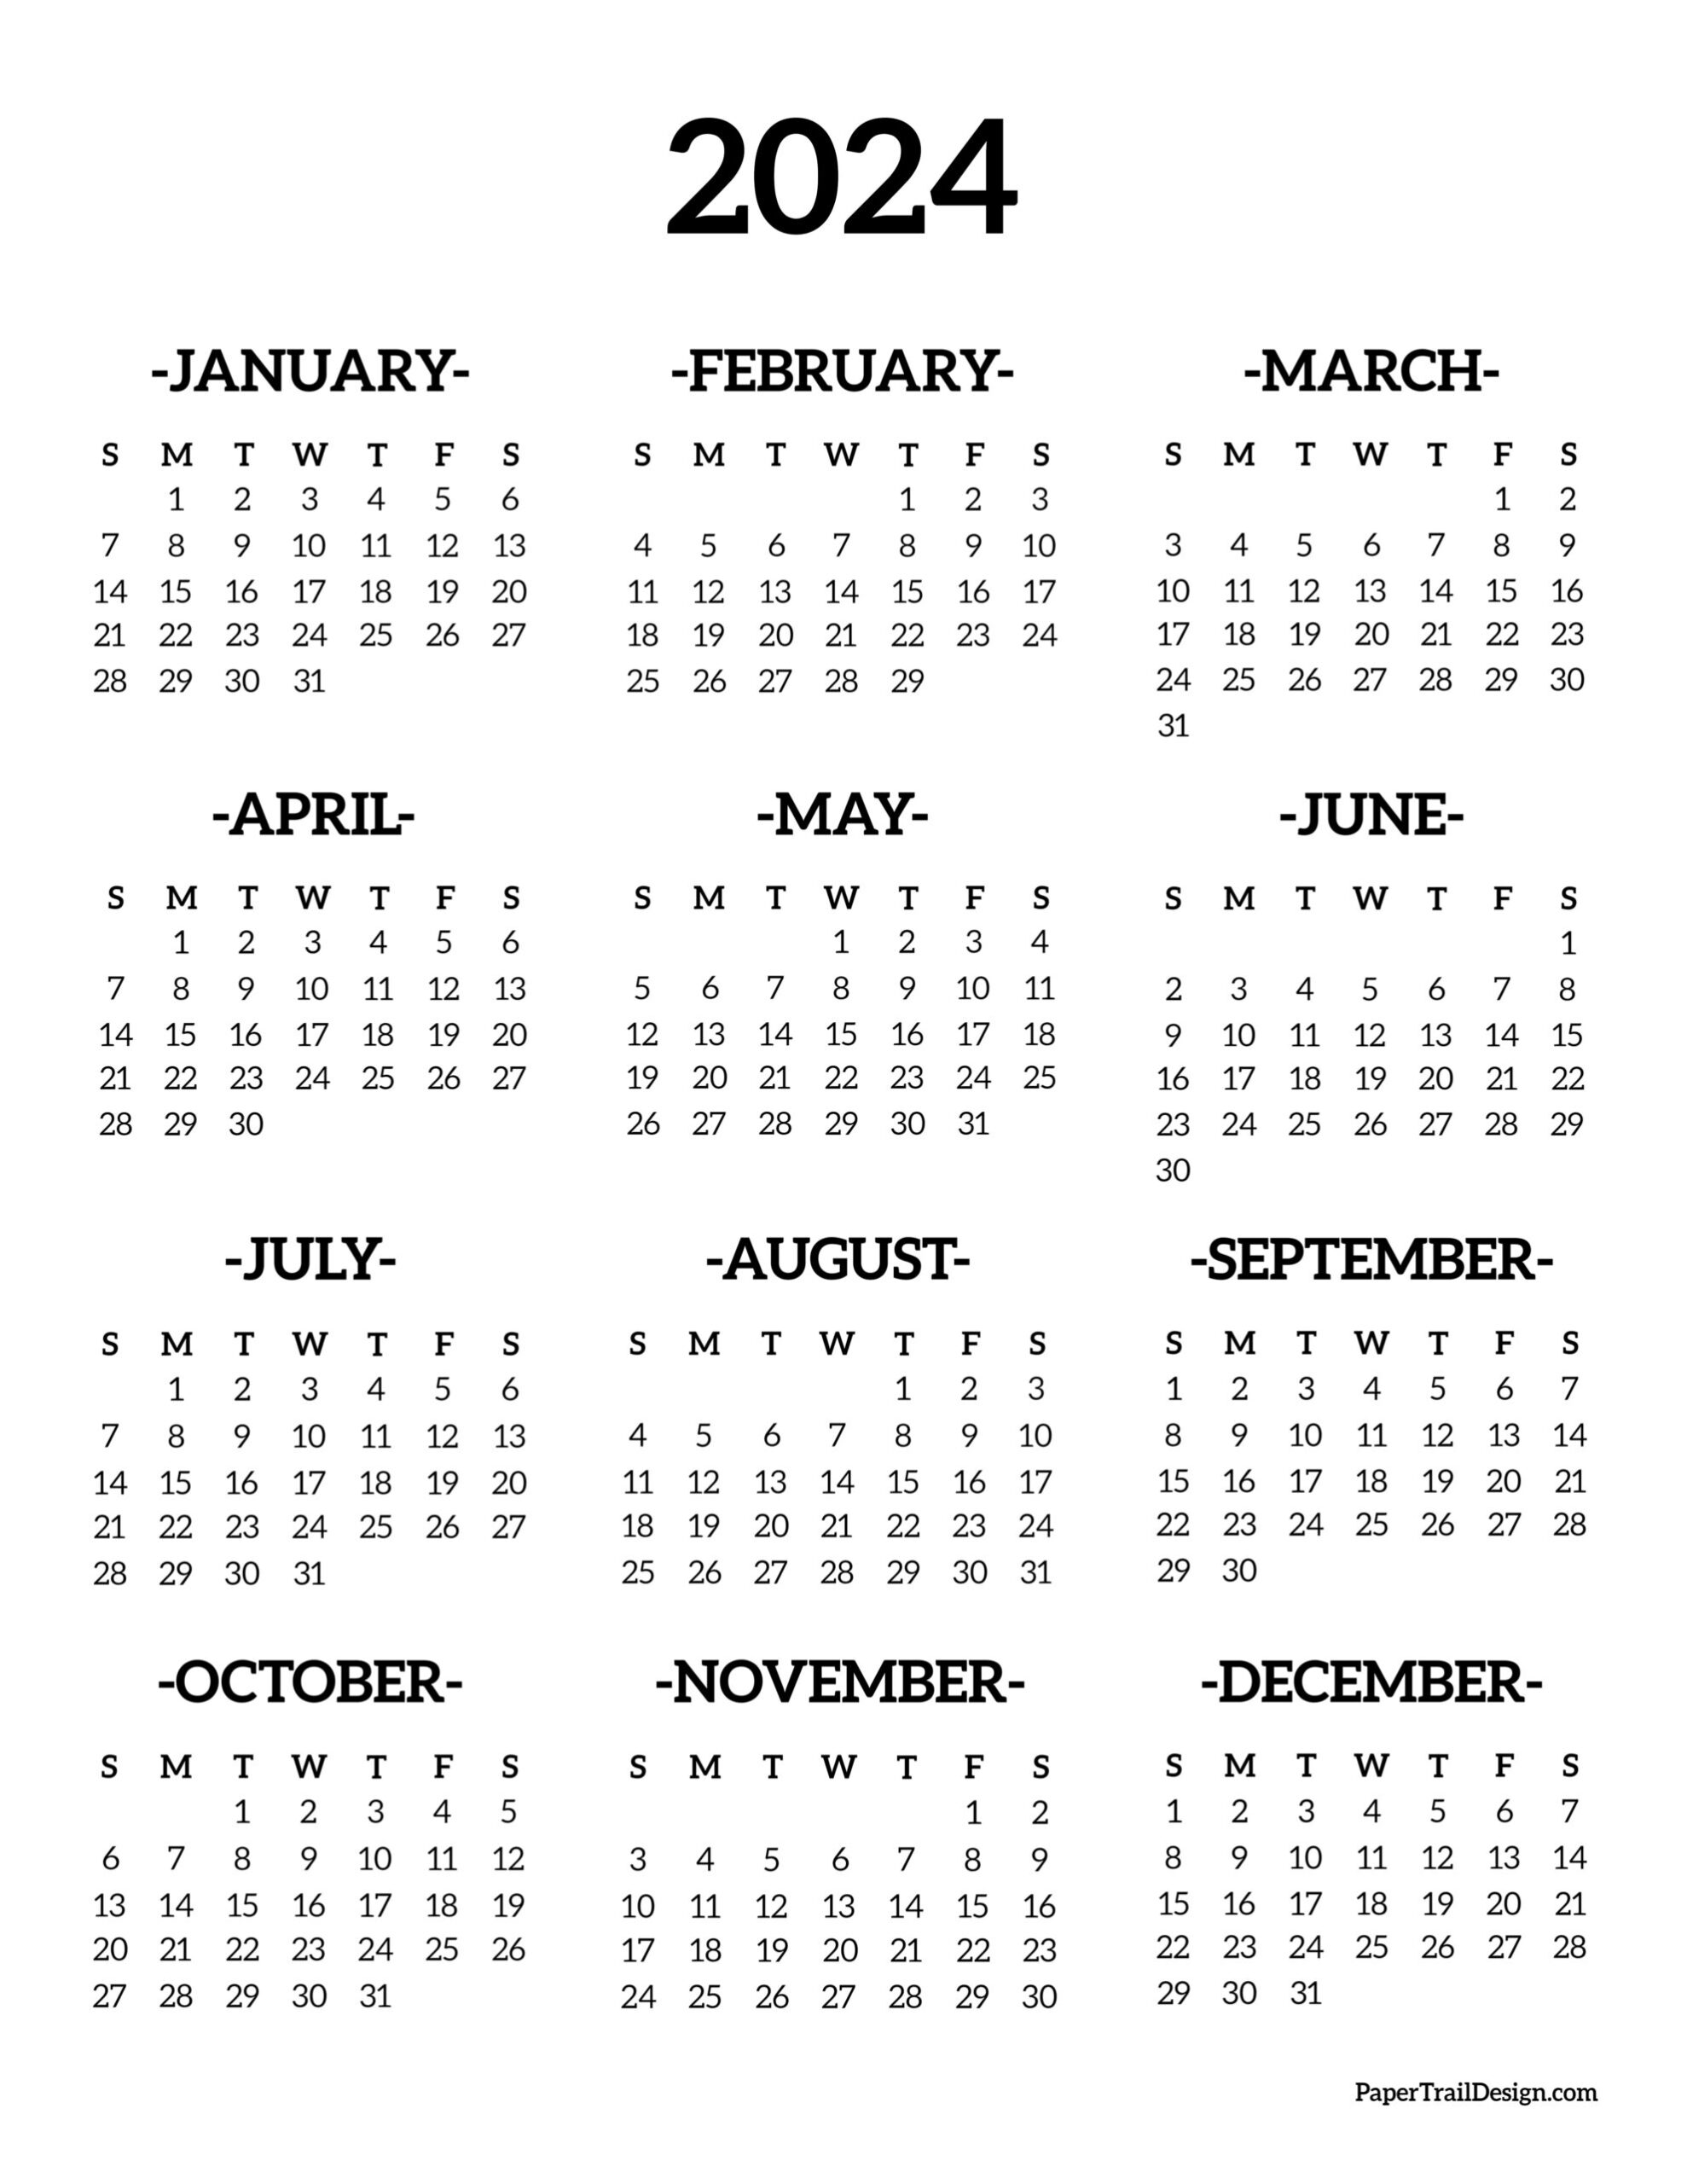 Calendar 2024 Printable One Page - Paper Trail Design for Free Yearly Calendar 2024 Printable